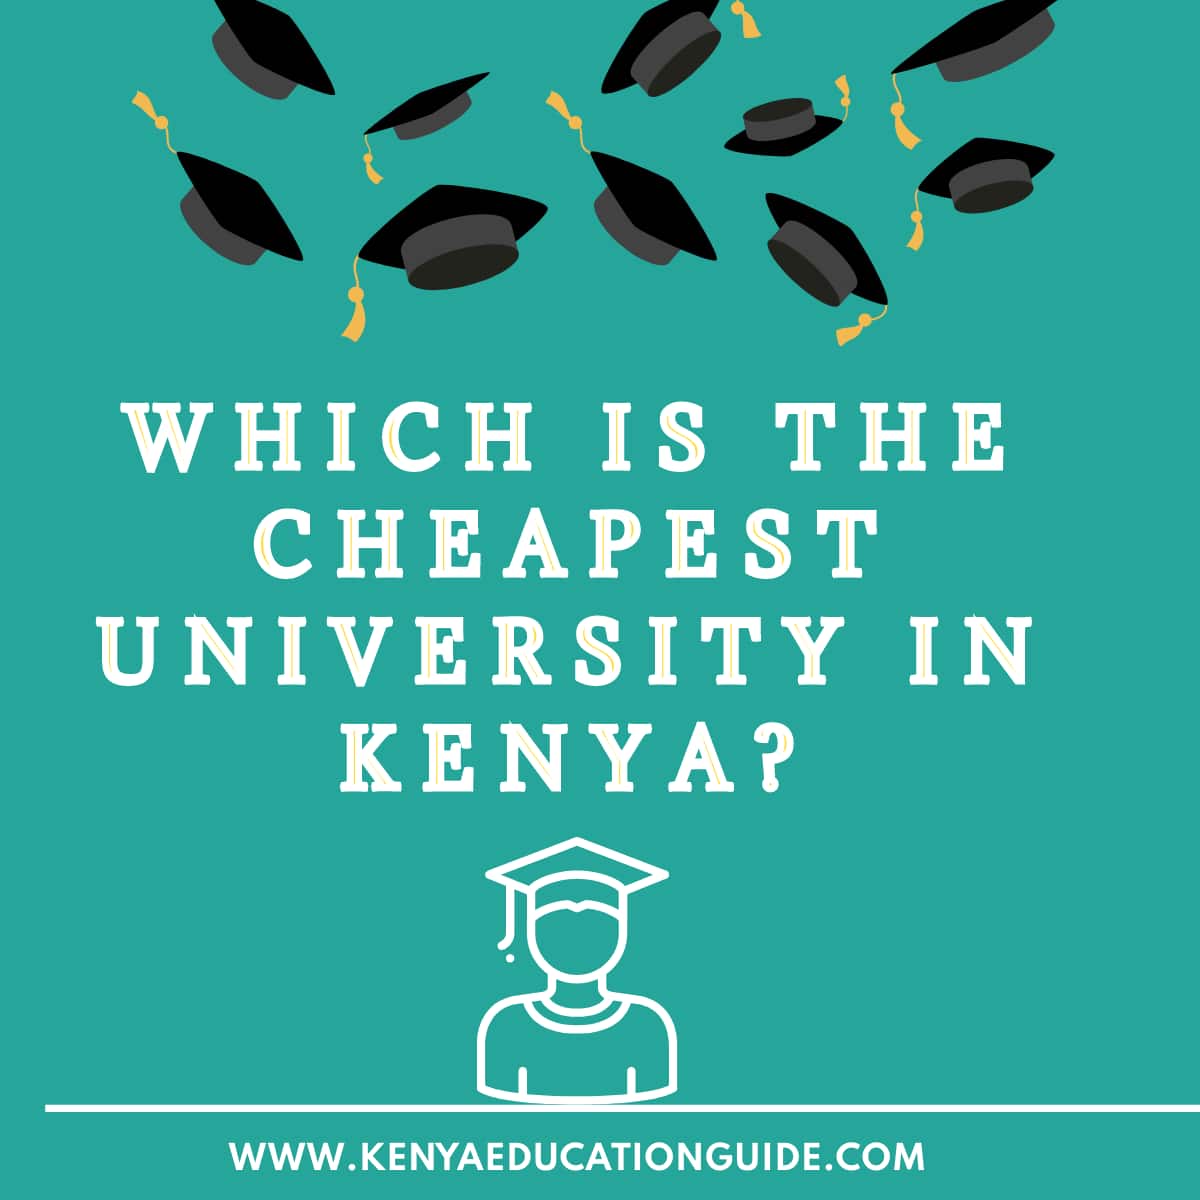 Which is the Cheapest University in Kenya?